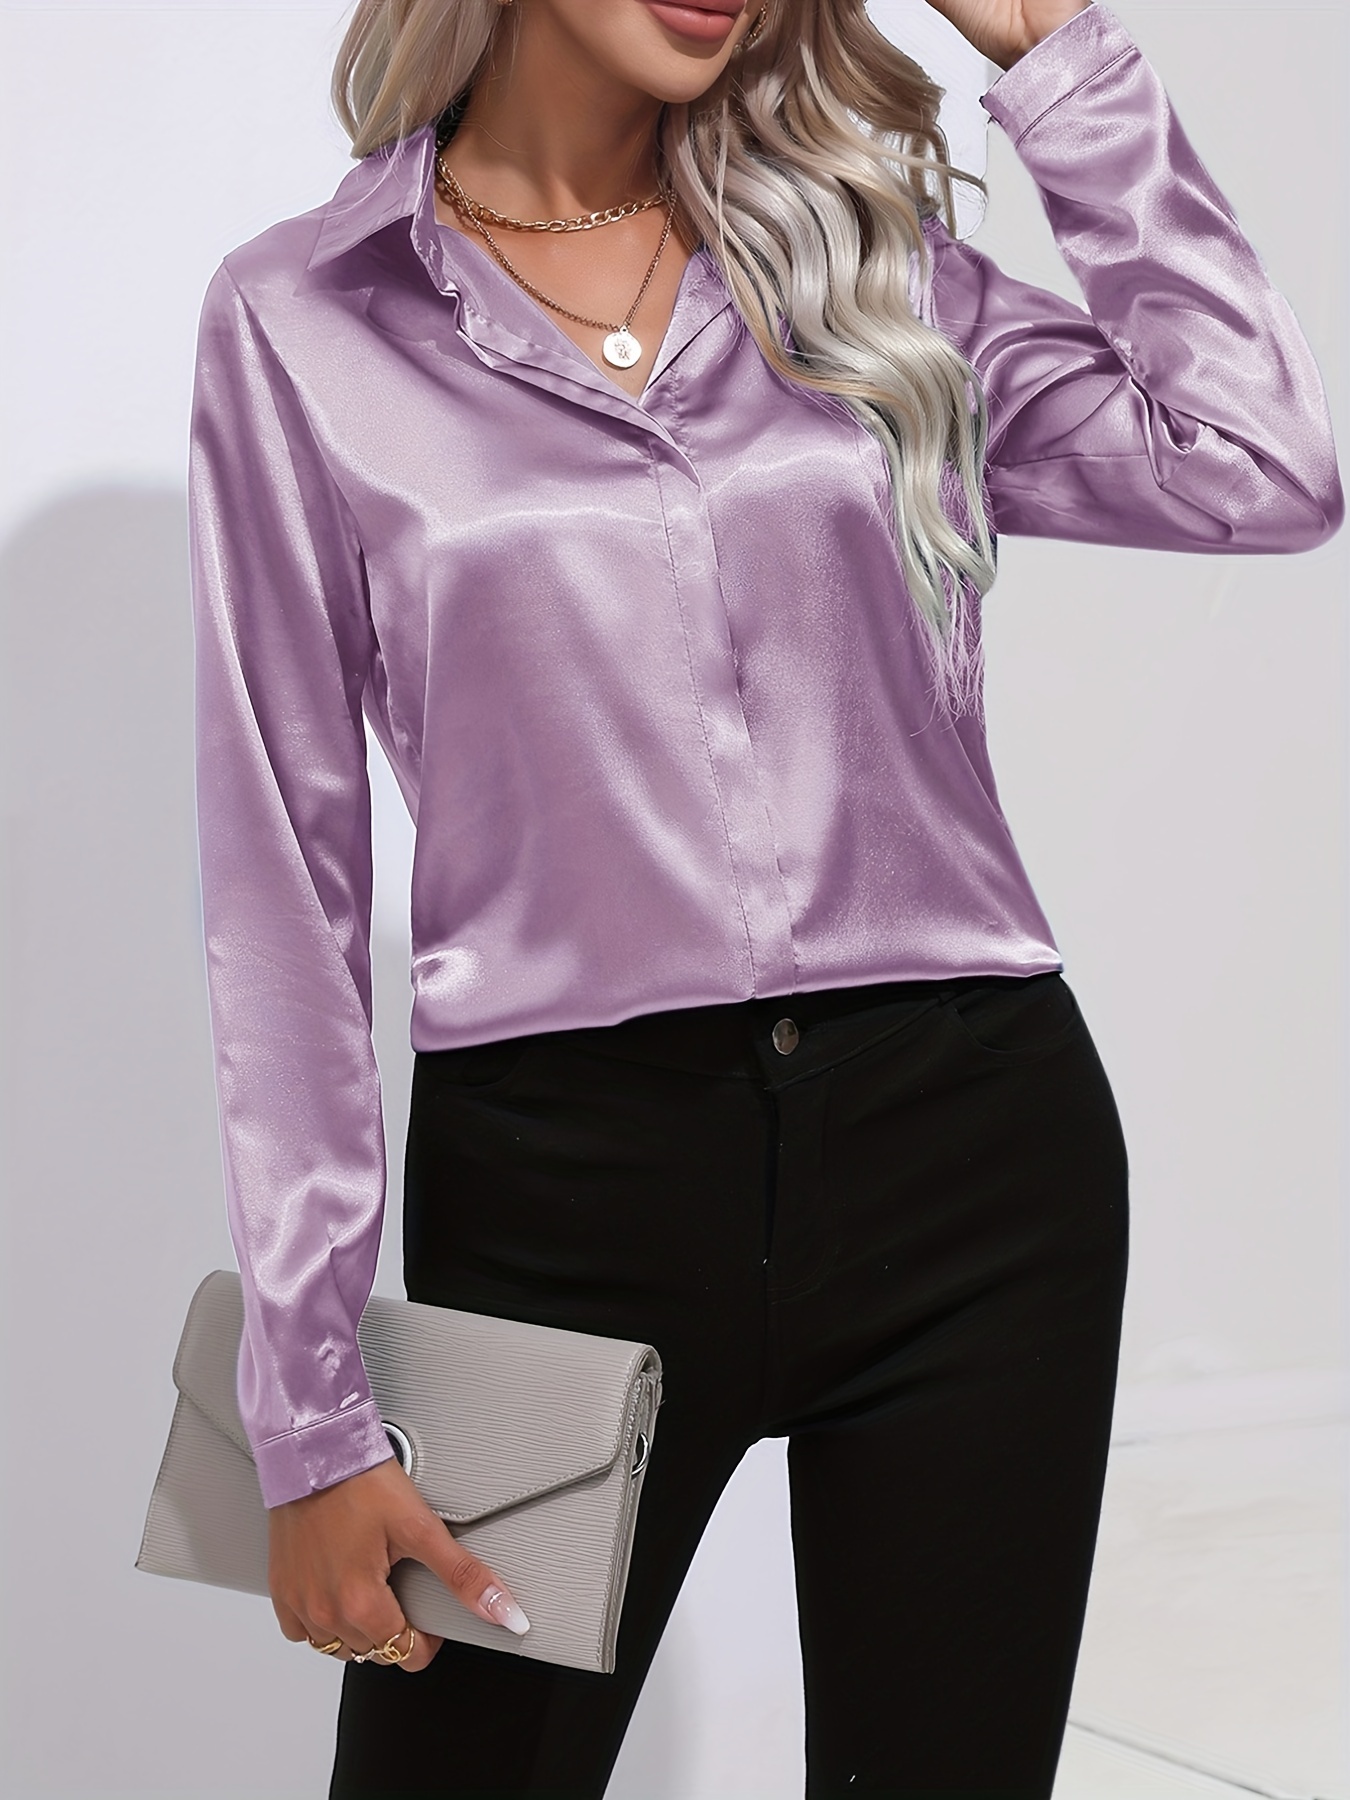 2023 Satin Long Sleeve Women's Shirts New Chic Office Lady Blouses